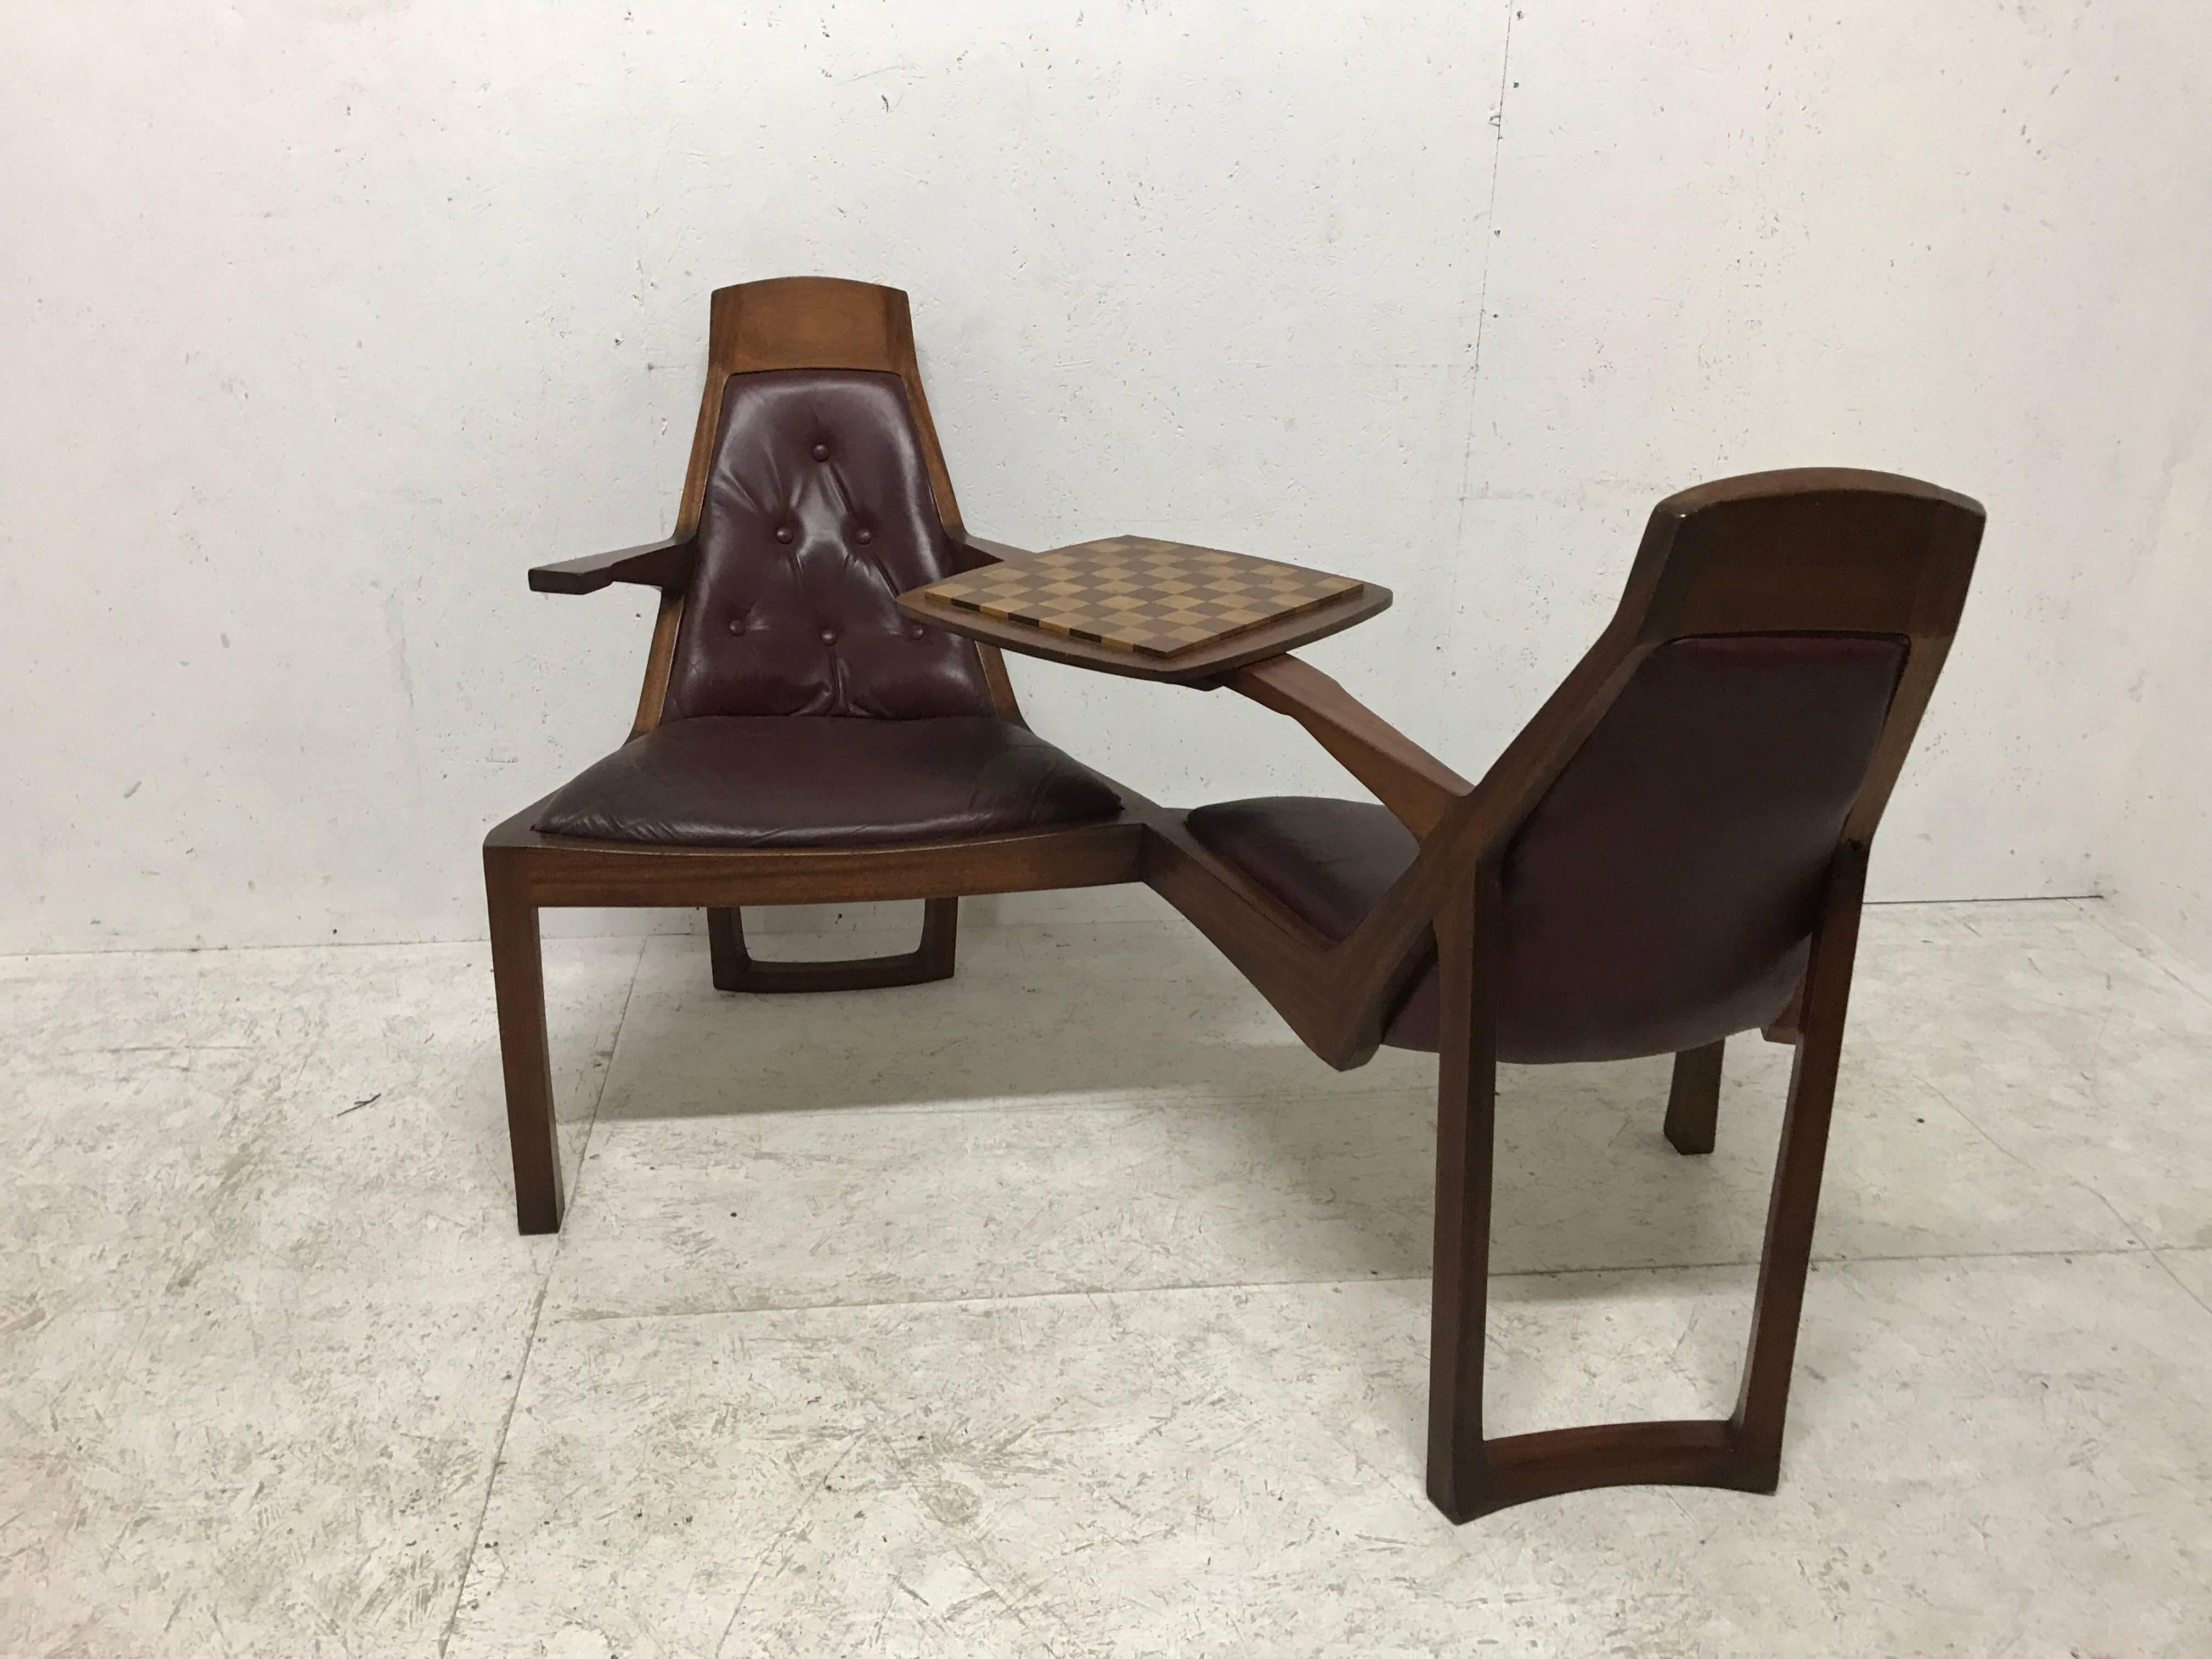 A superbly designed 'Danish style' teak duet seat for lovers of chess, this is a work of style, design, comfort and craftsmanship, it looks like it almost floats. There is a subtle organic feel about the whole composition. Beautifully hand made the